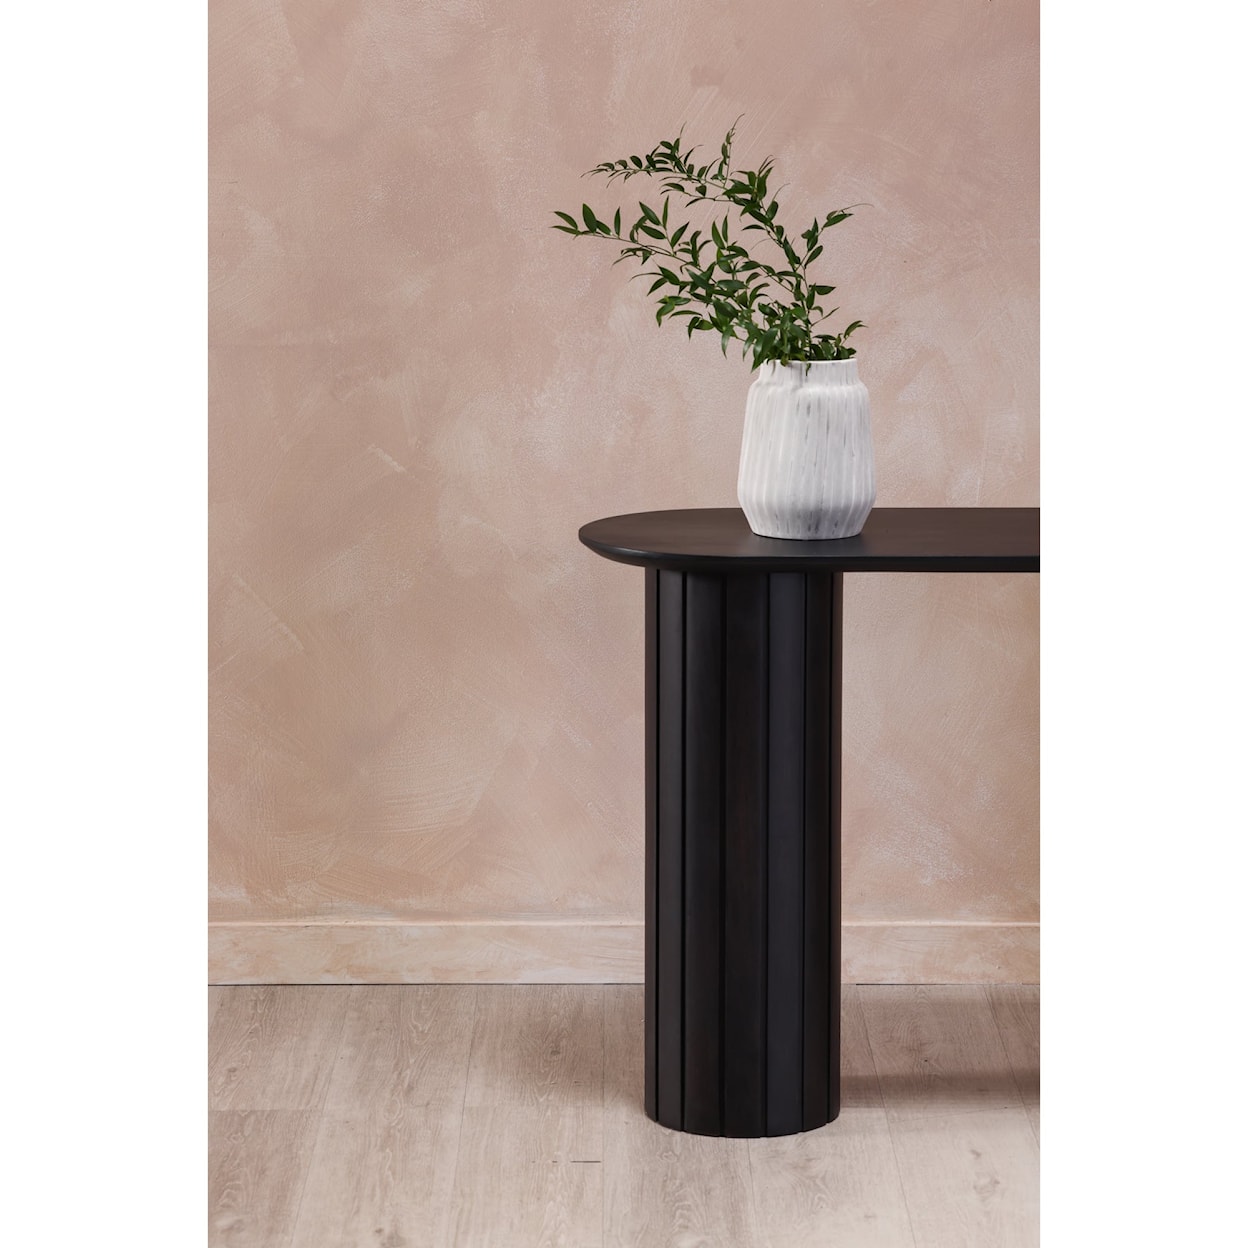 Moe's Home Collection Povera Console Table